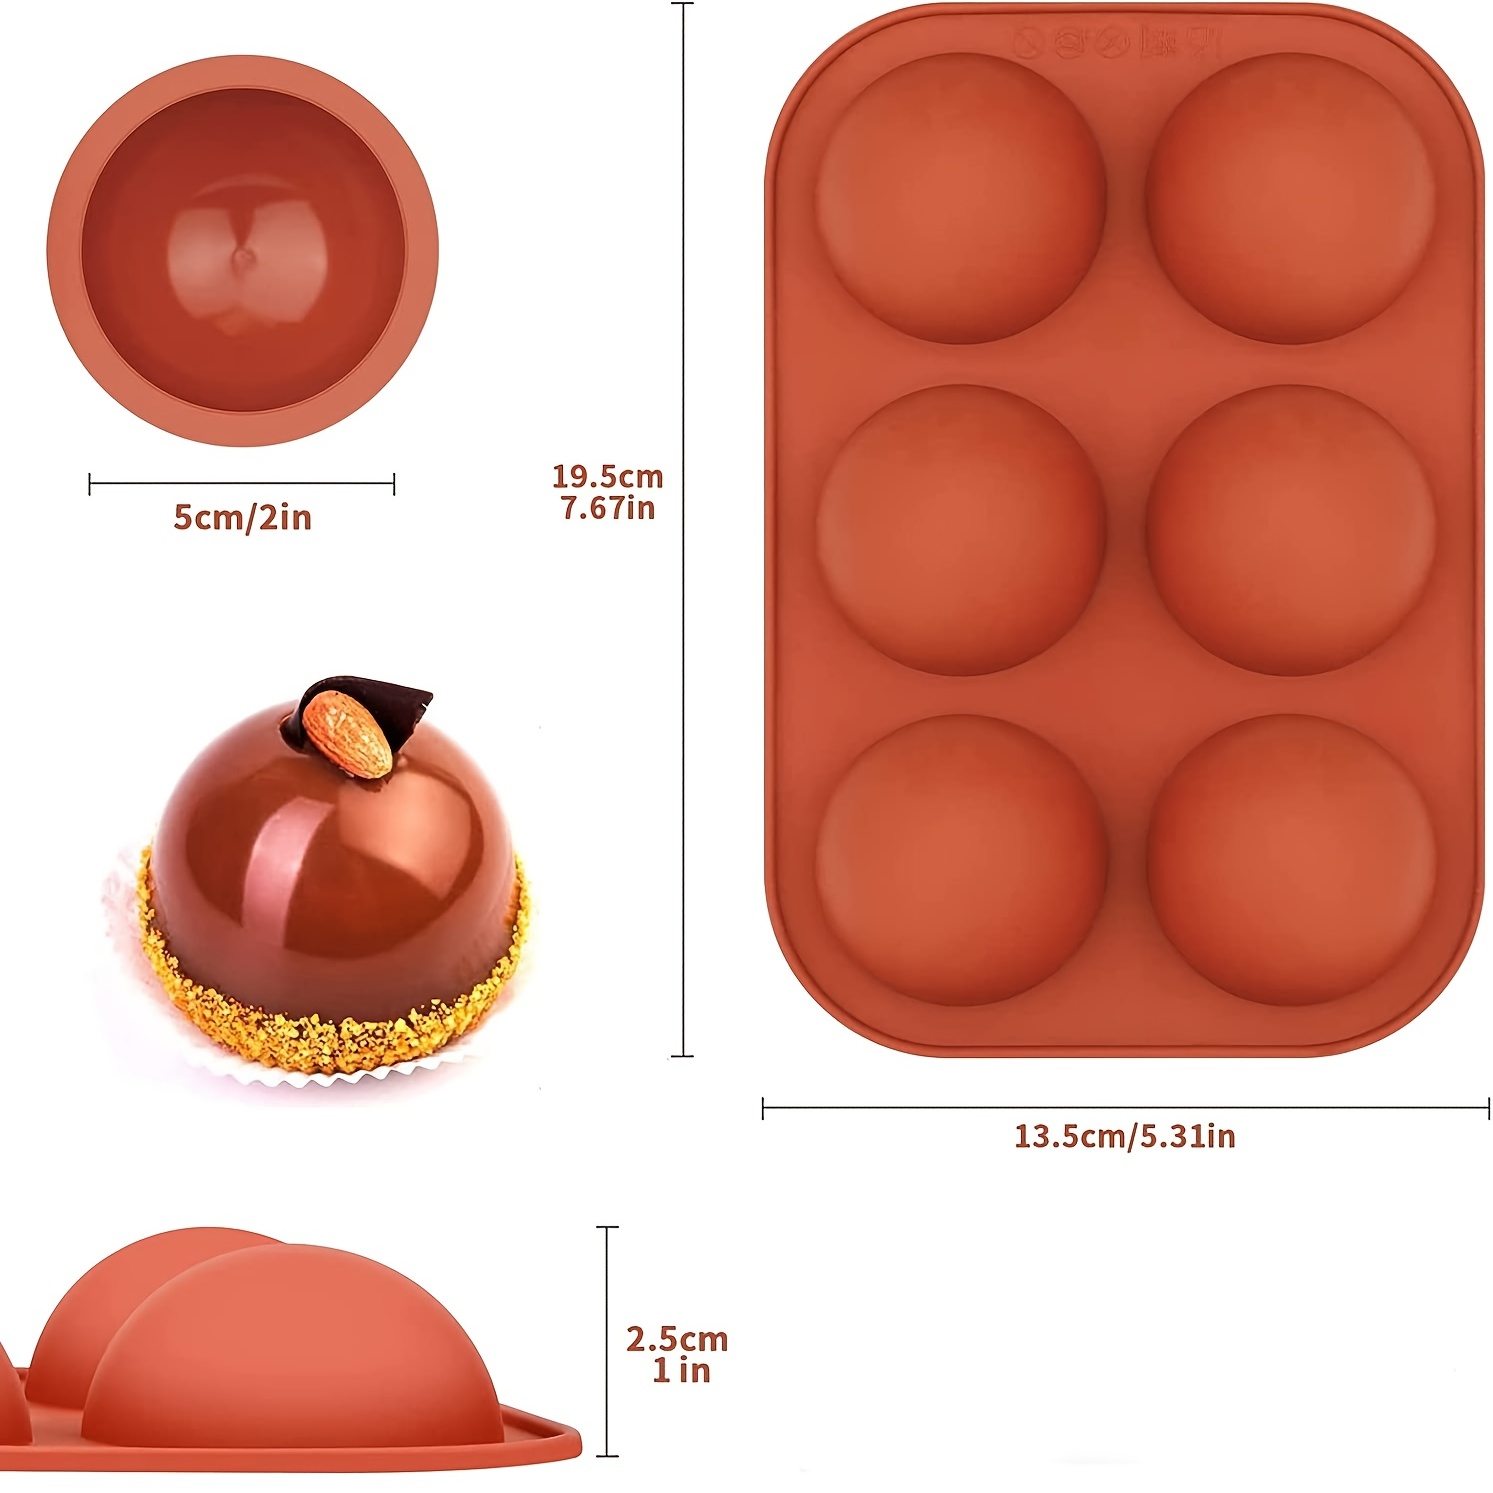 5-Pack Small Silicone Molds for Crafting Hot Chocolate, Cake, Jelly Domes